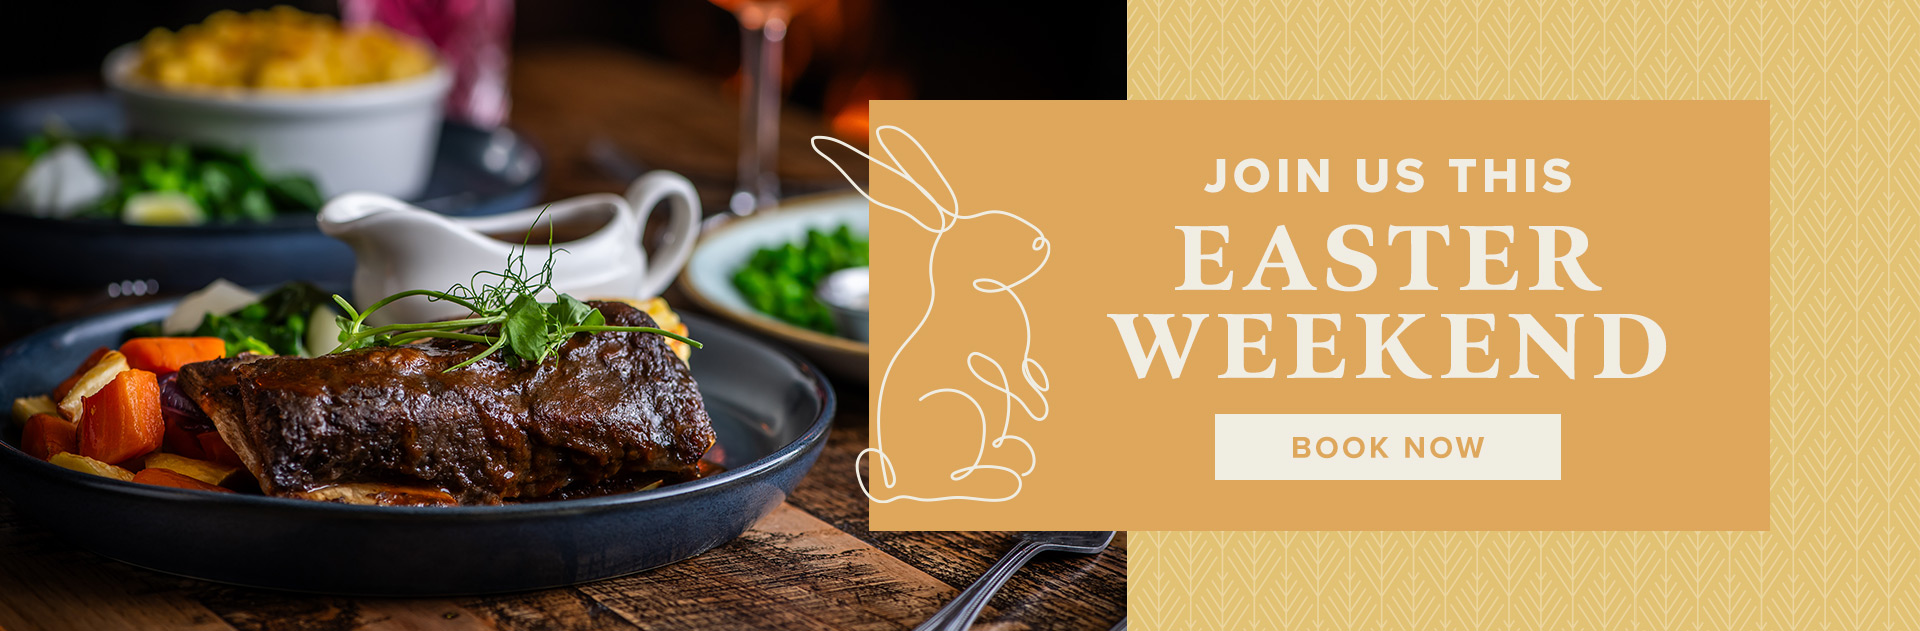 Easter at The White Horse in Chelmsford